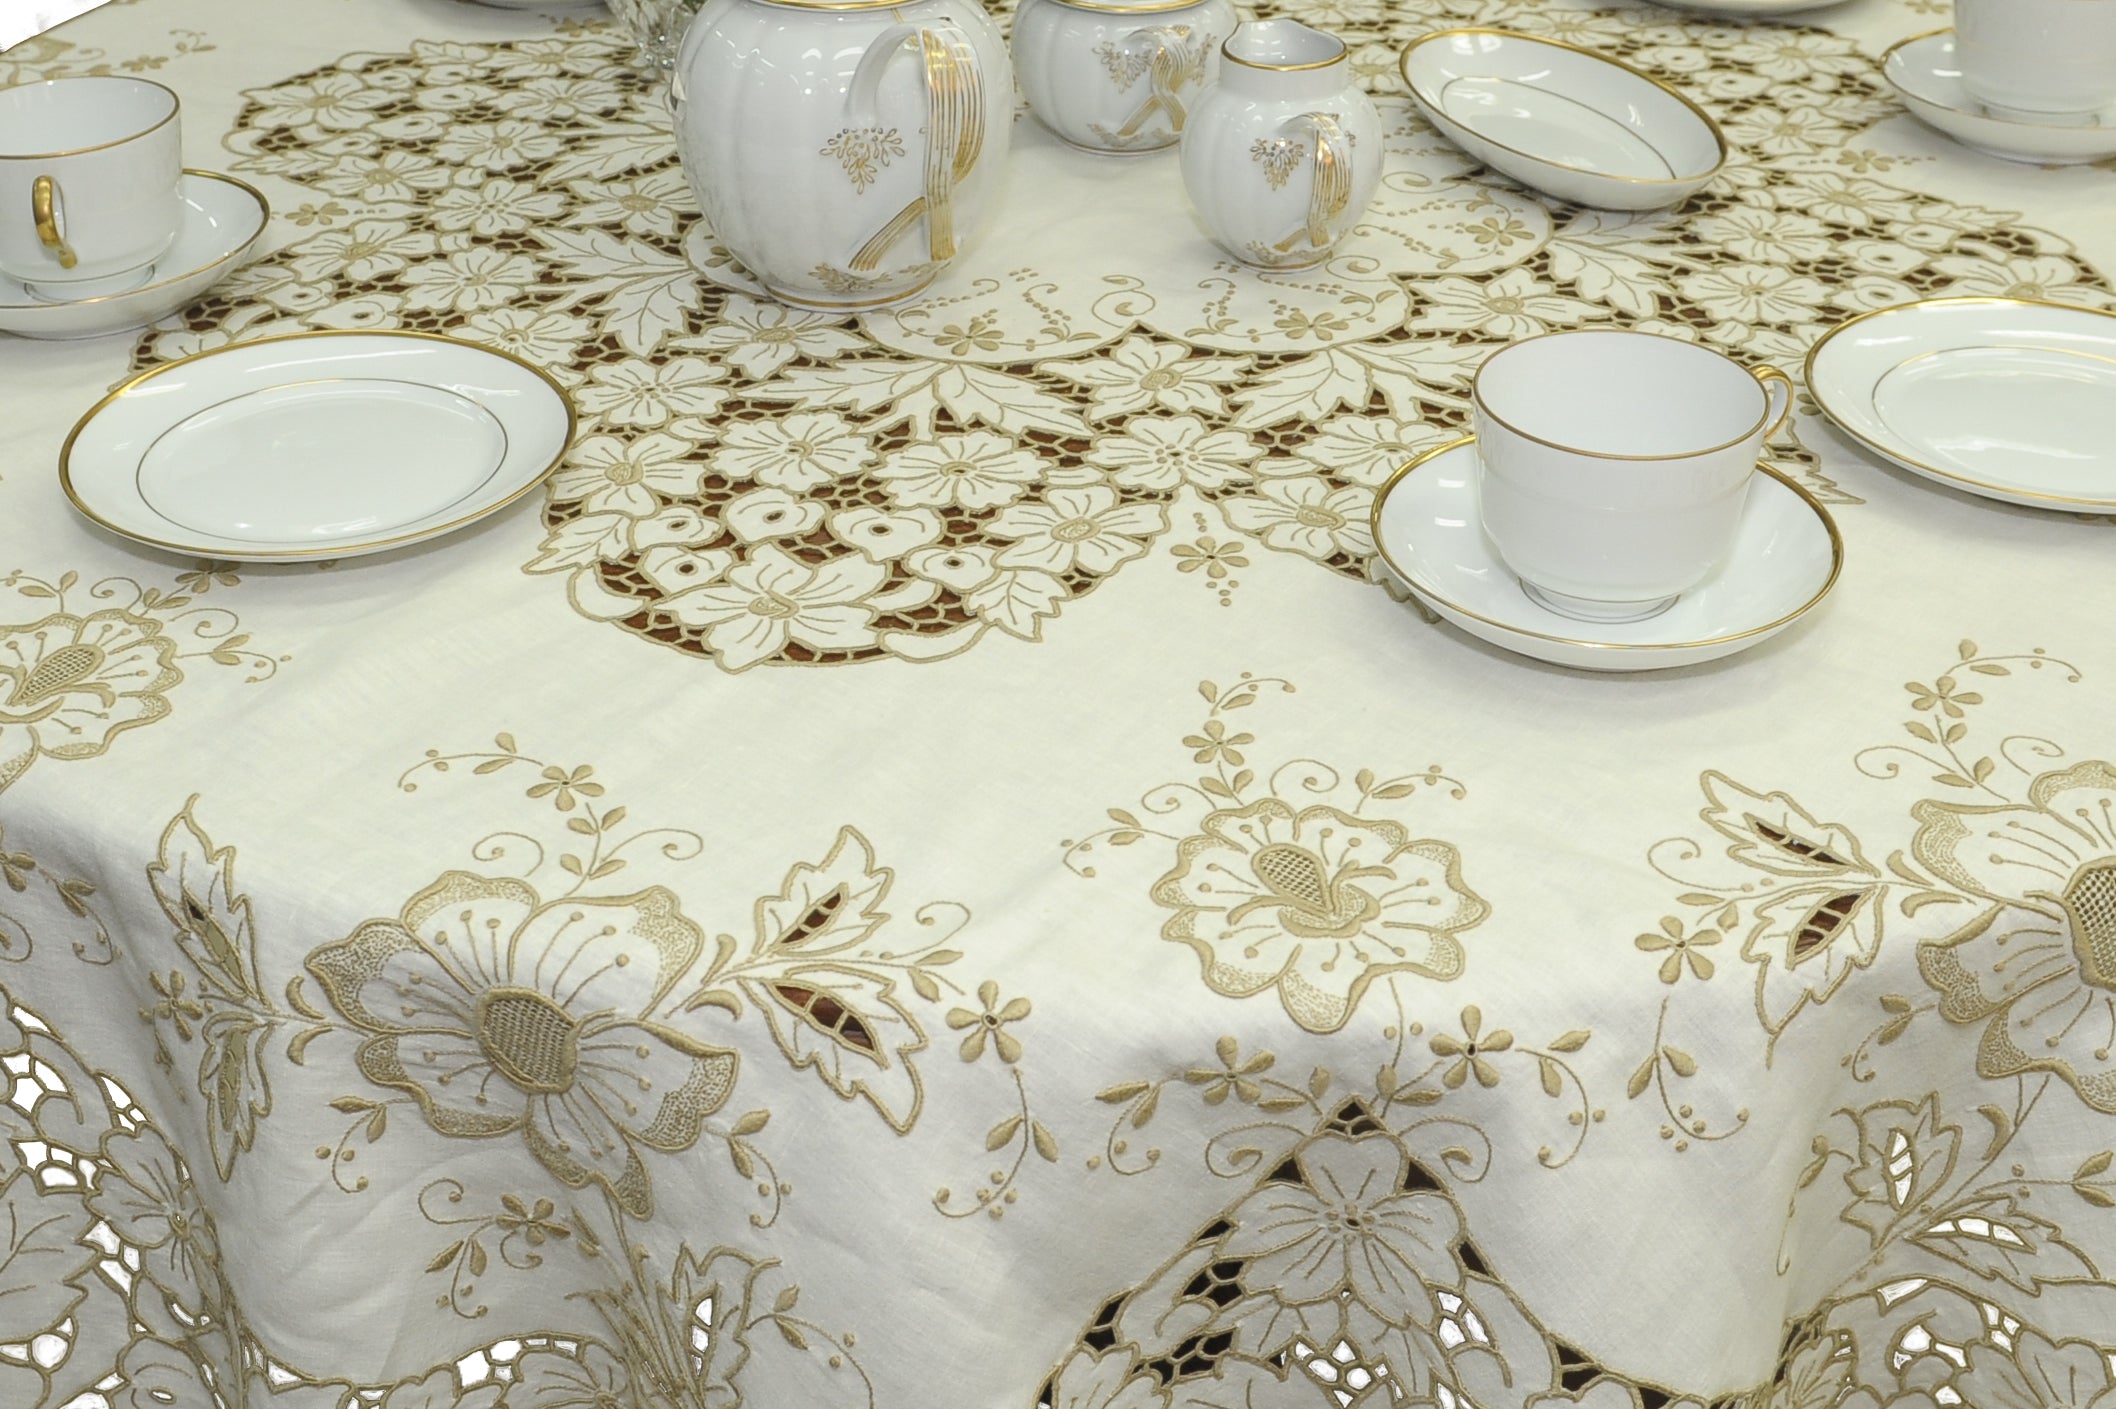 Handmade Madeira Embroidered Round Tablecloth with napkins, Linen